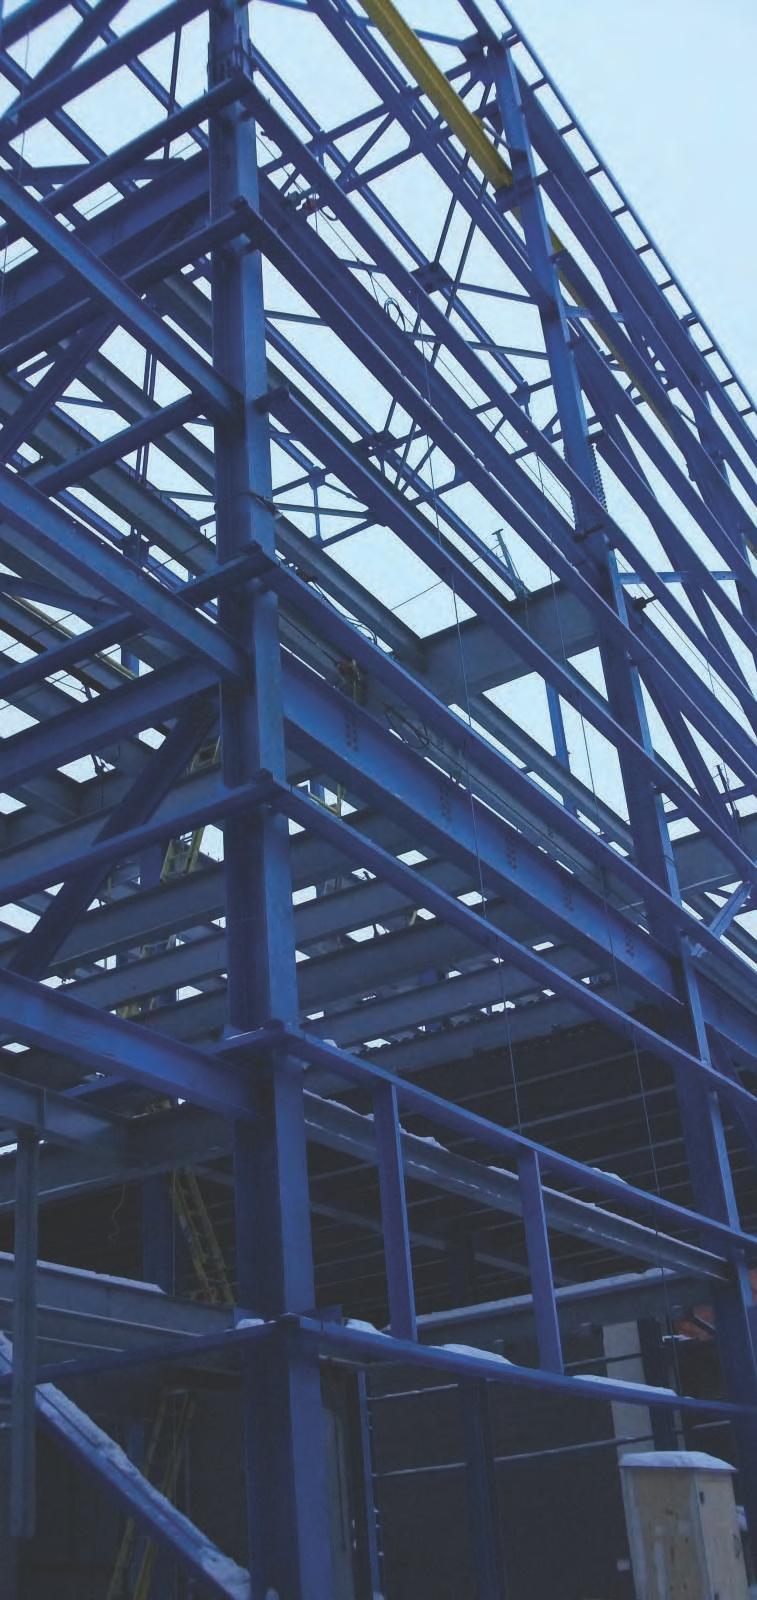 Structural Steel Our Structural Steel Division fabricates and erects customers projects efficiently and to exacting specifications whether the project is a completely new build from the ground up or